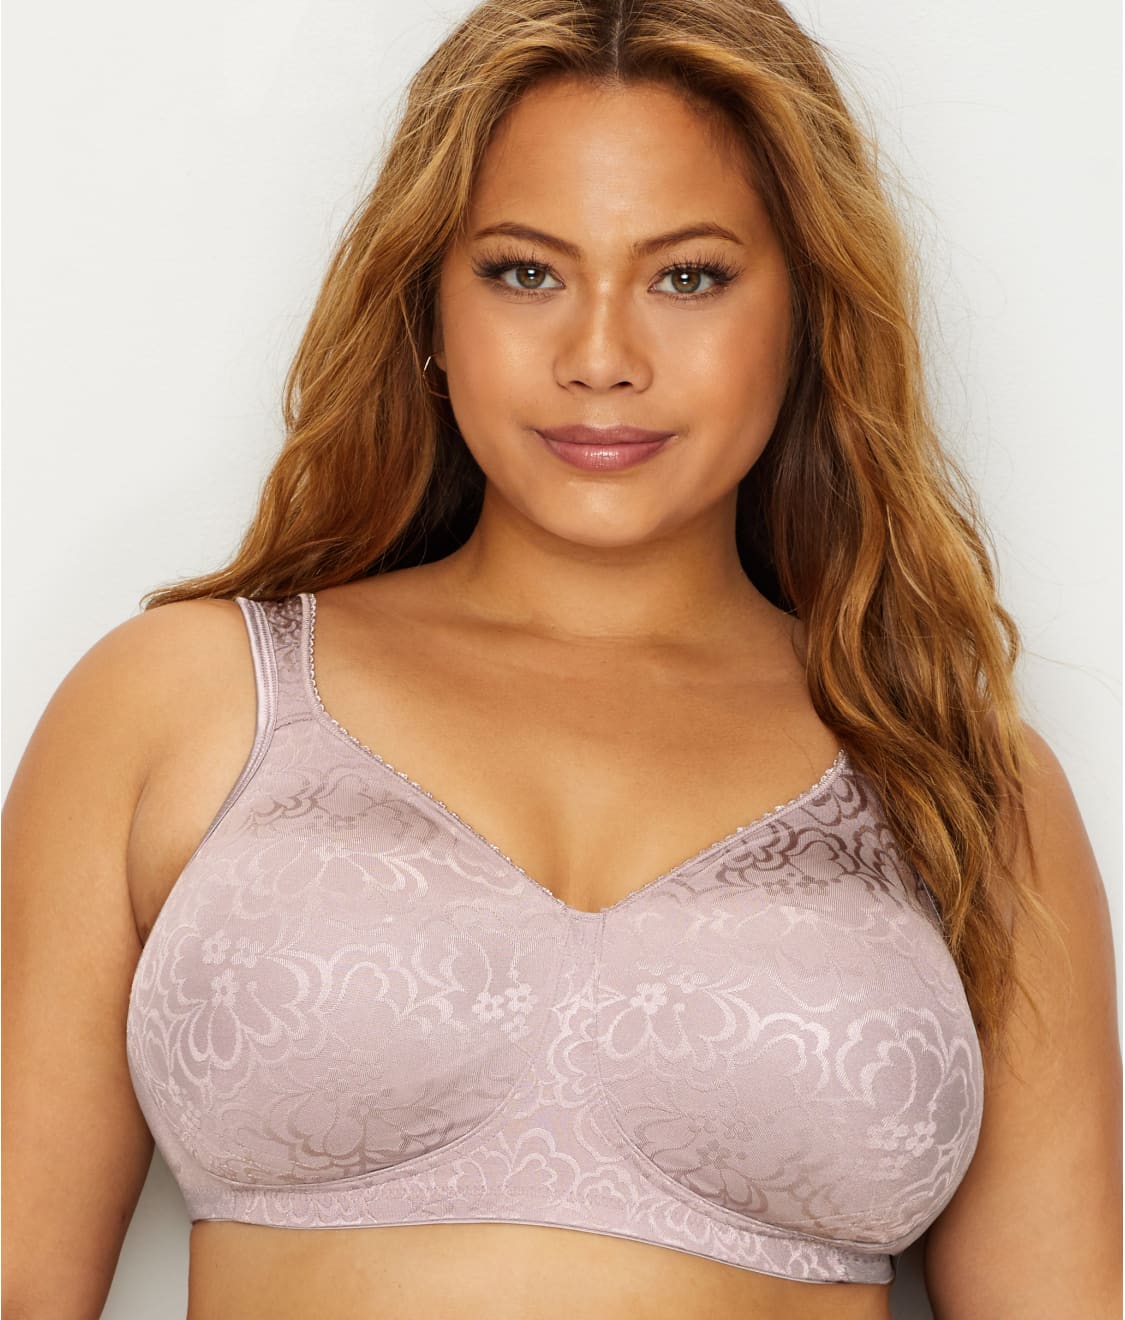 NEW Playtex Ultimate Lift and Support Wire Free Bra #4745 ~ White or Warm Steel